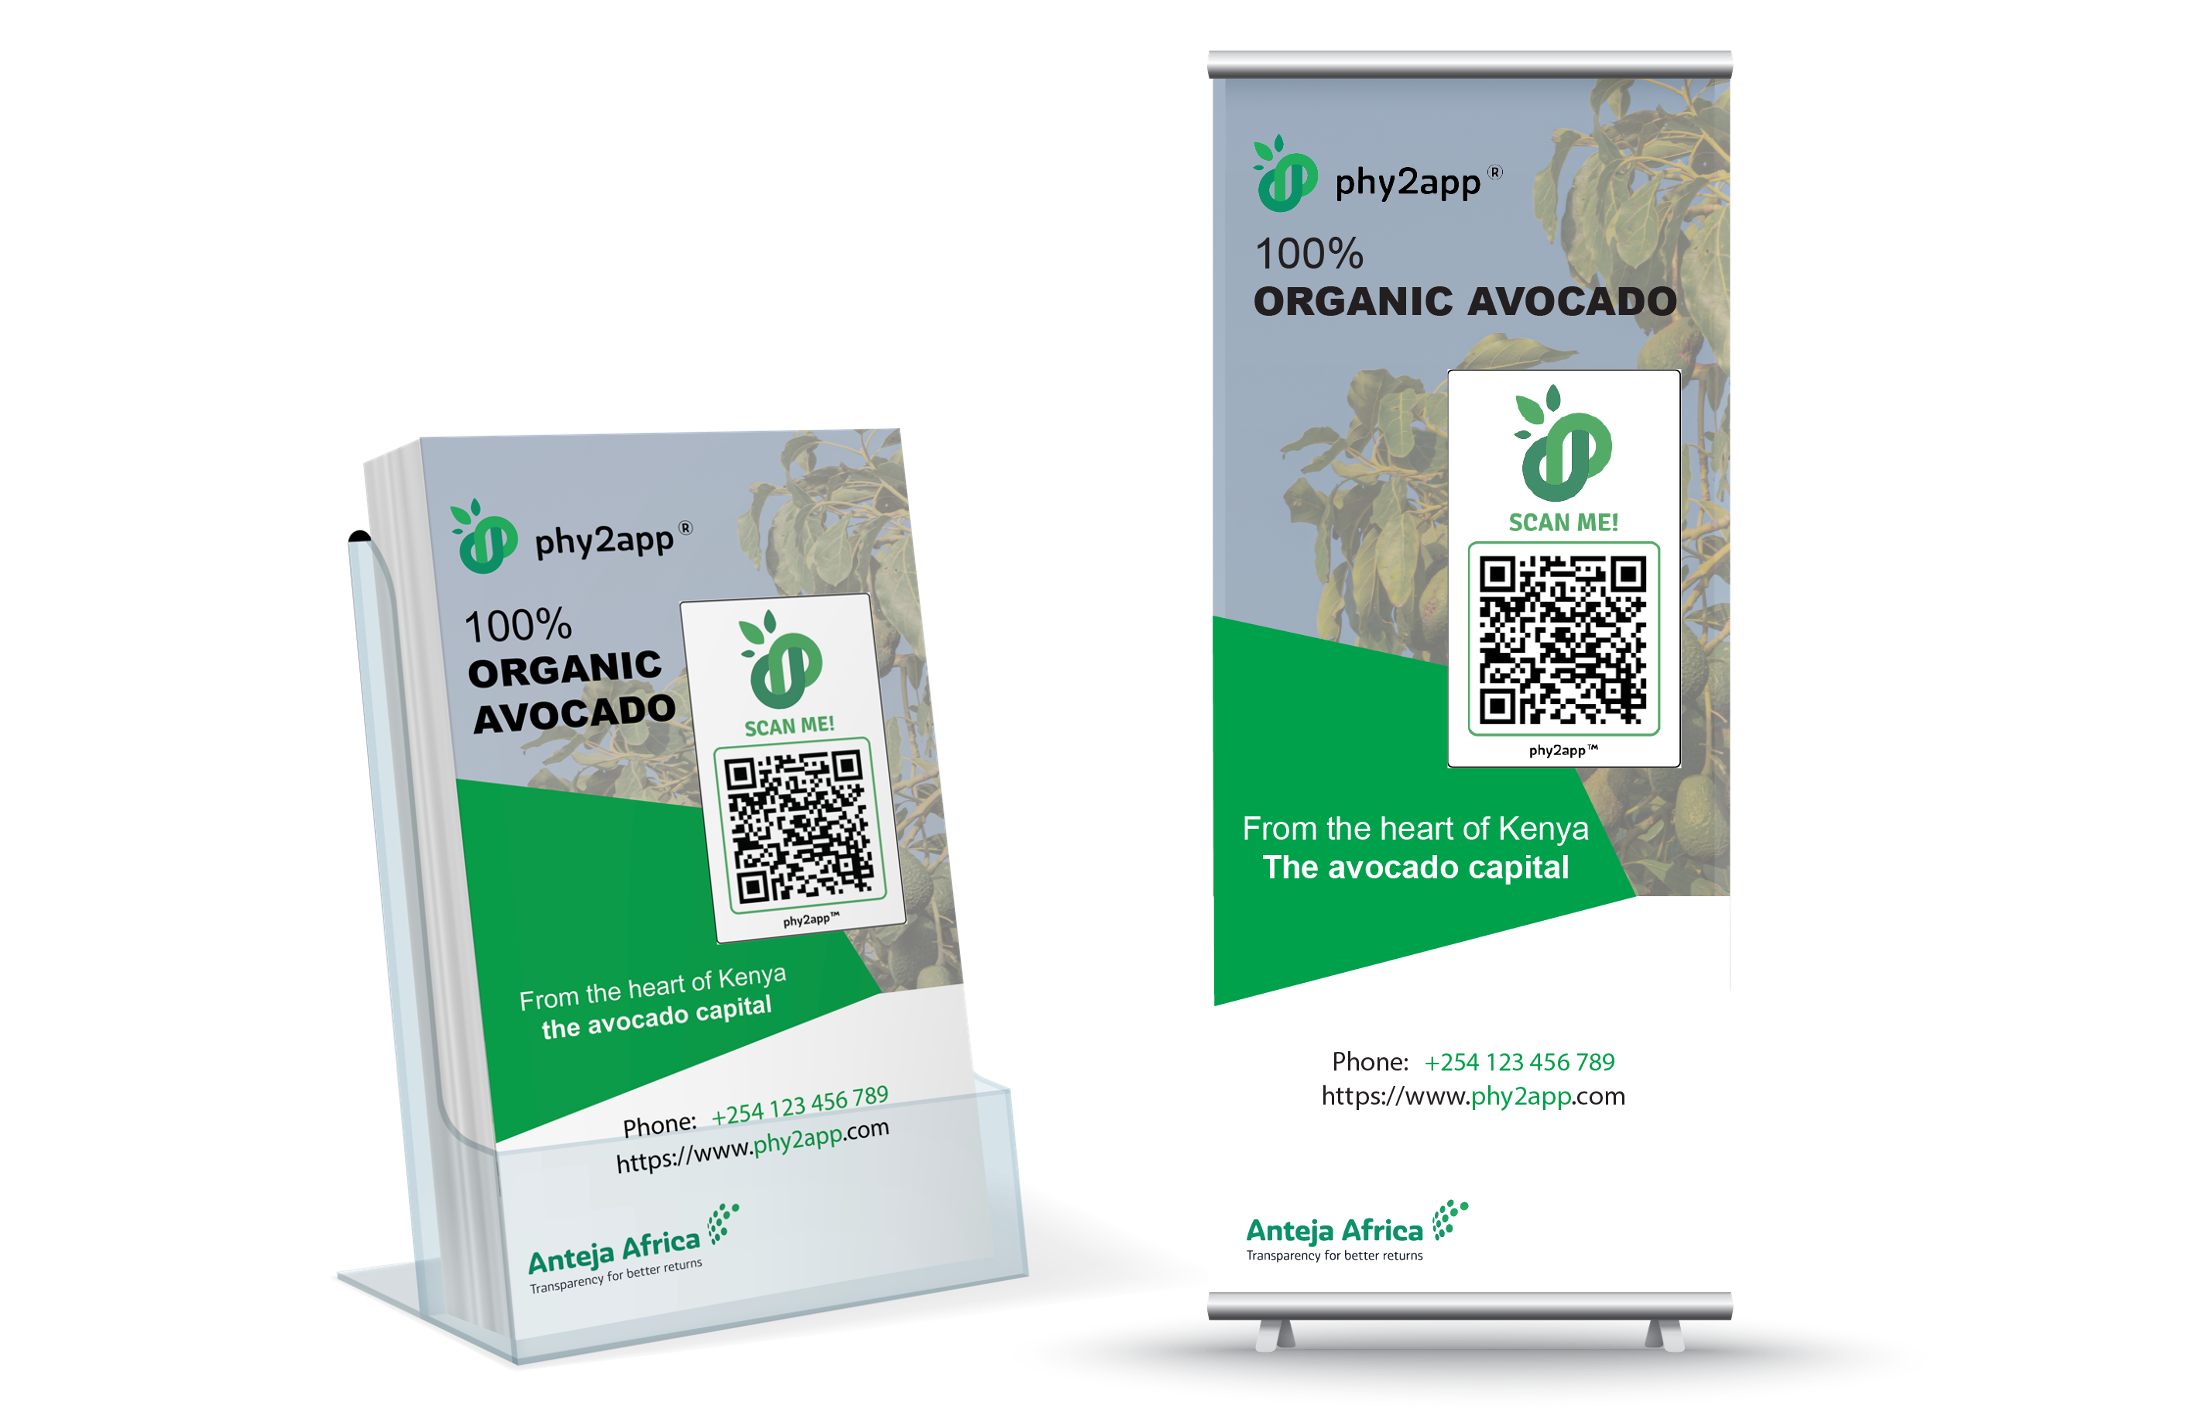 phy2app QR labels on marketing material